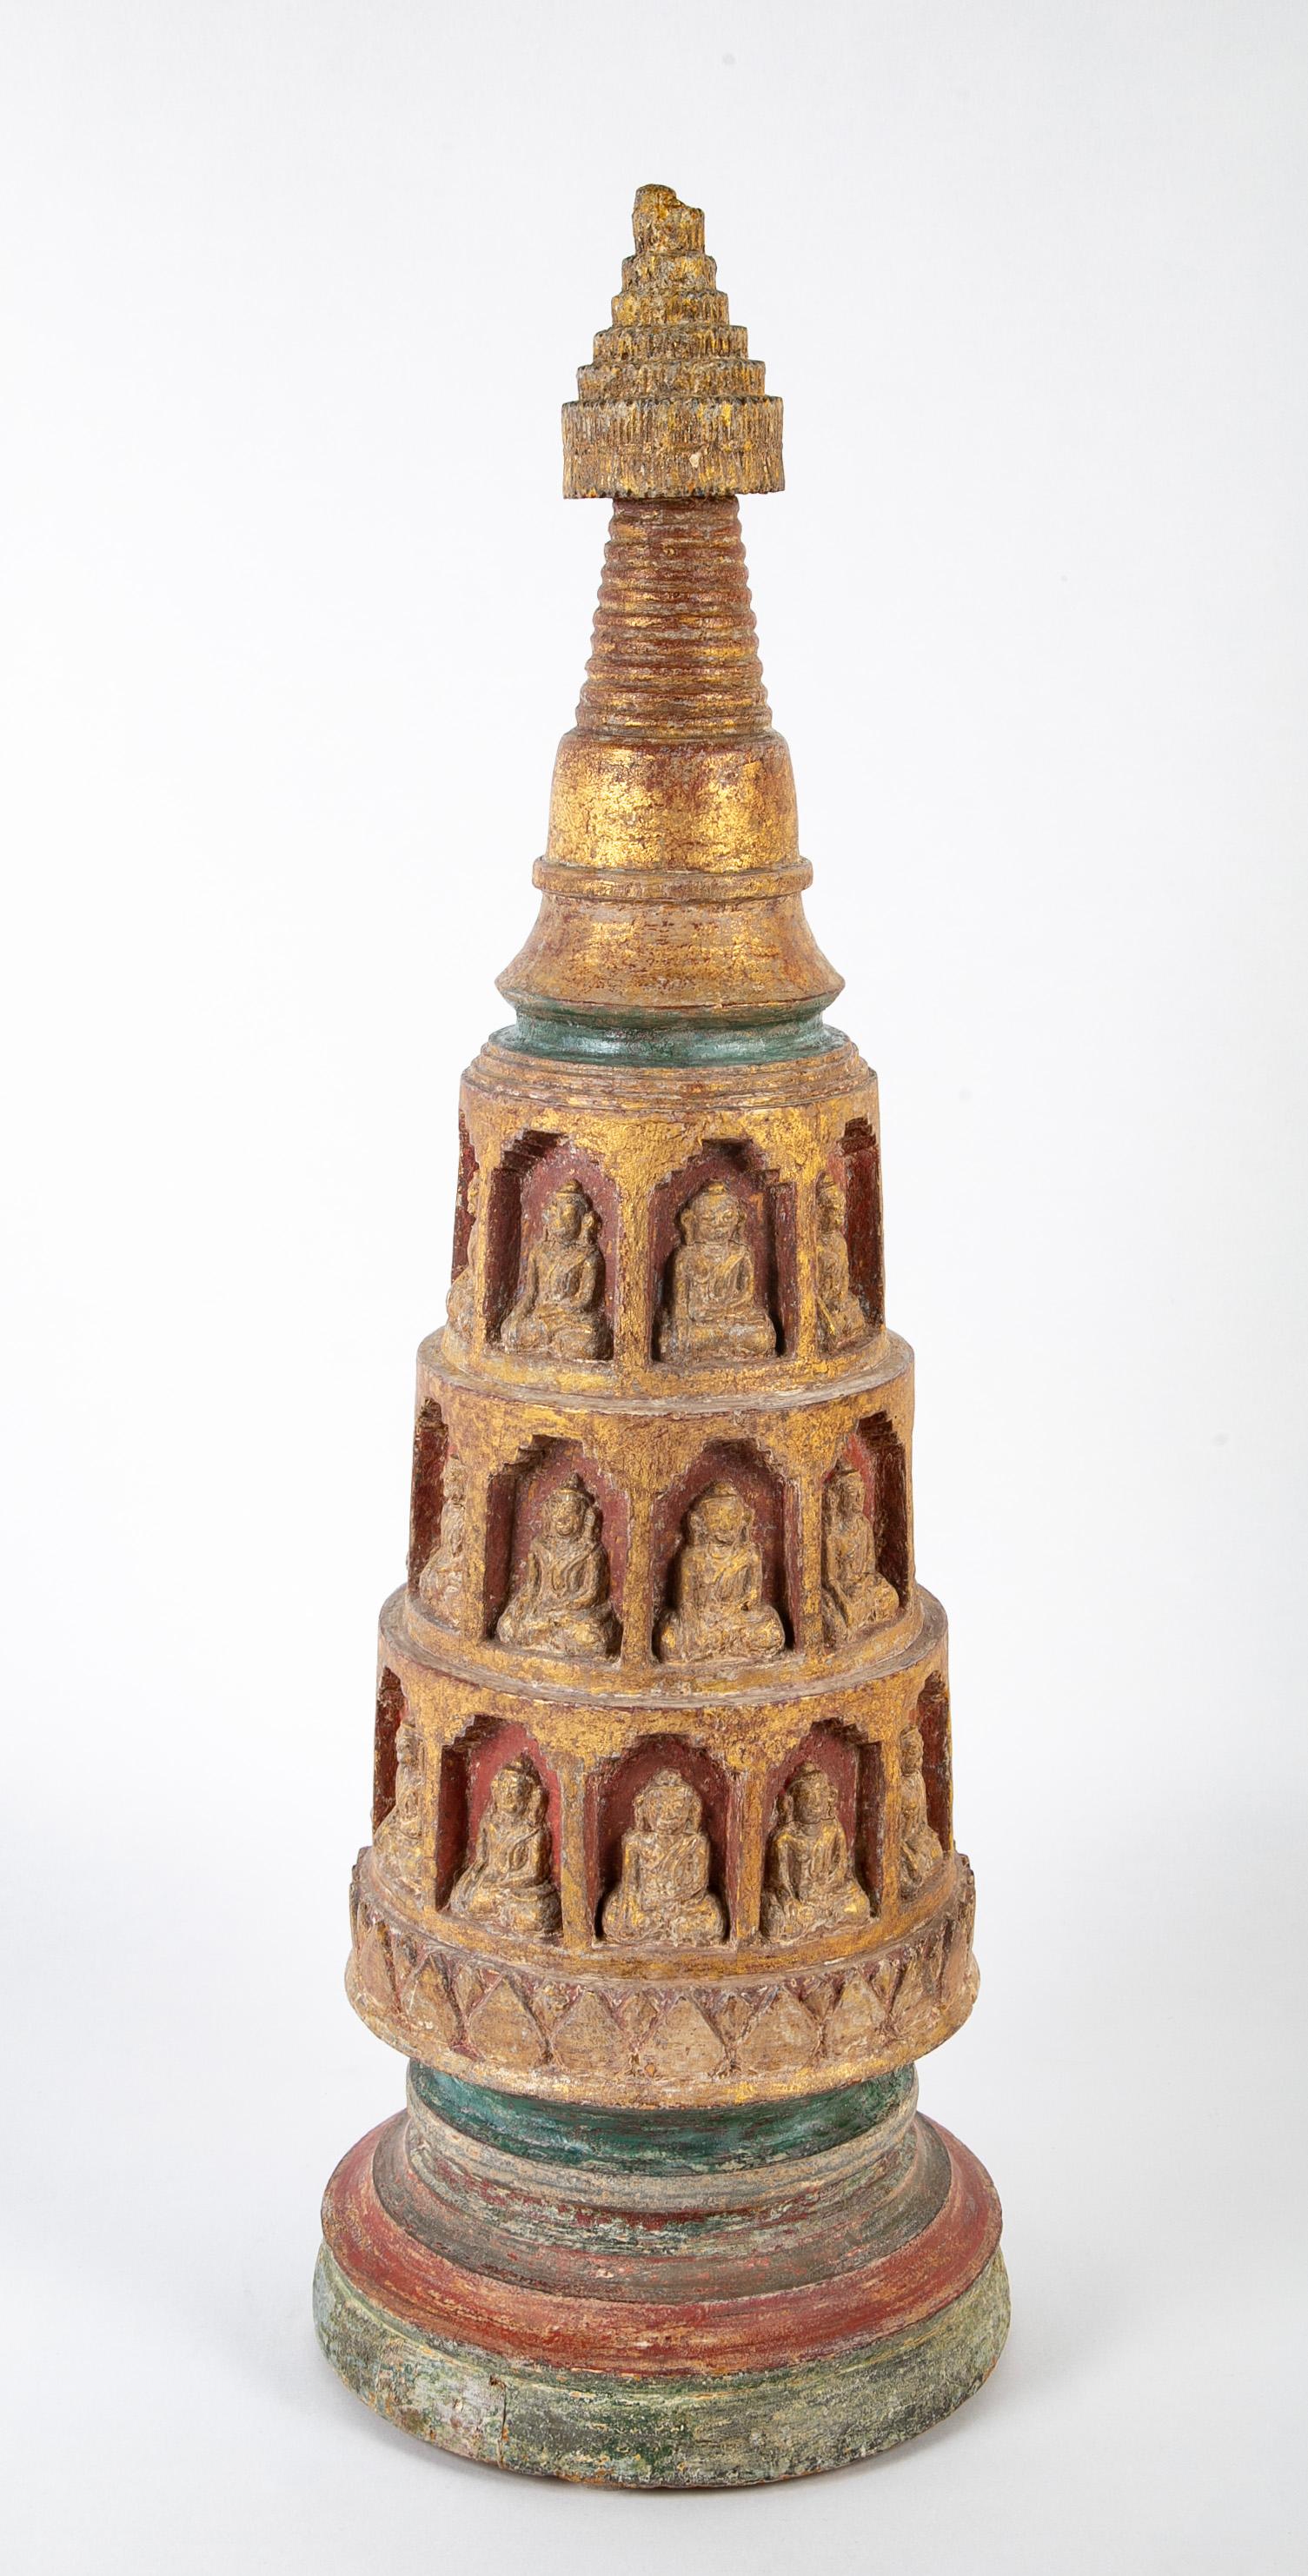 A wonderfully carved 18th century Burmese Shan period stupa with many seated Buddha's set in niches. With original gilding and red and green polychrome. 
The stupa is a Buddhist architectural monument honoring a sacred site. Lovely worn surface